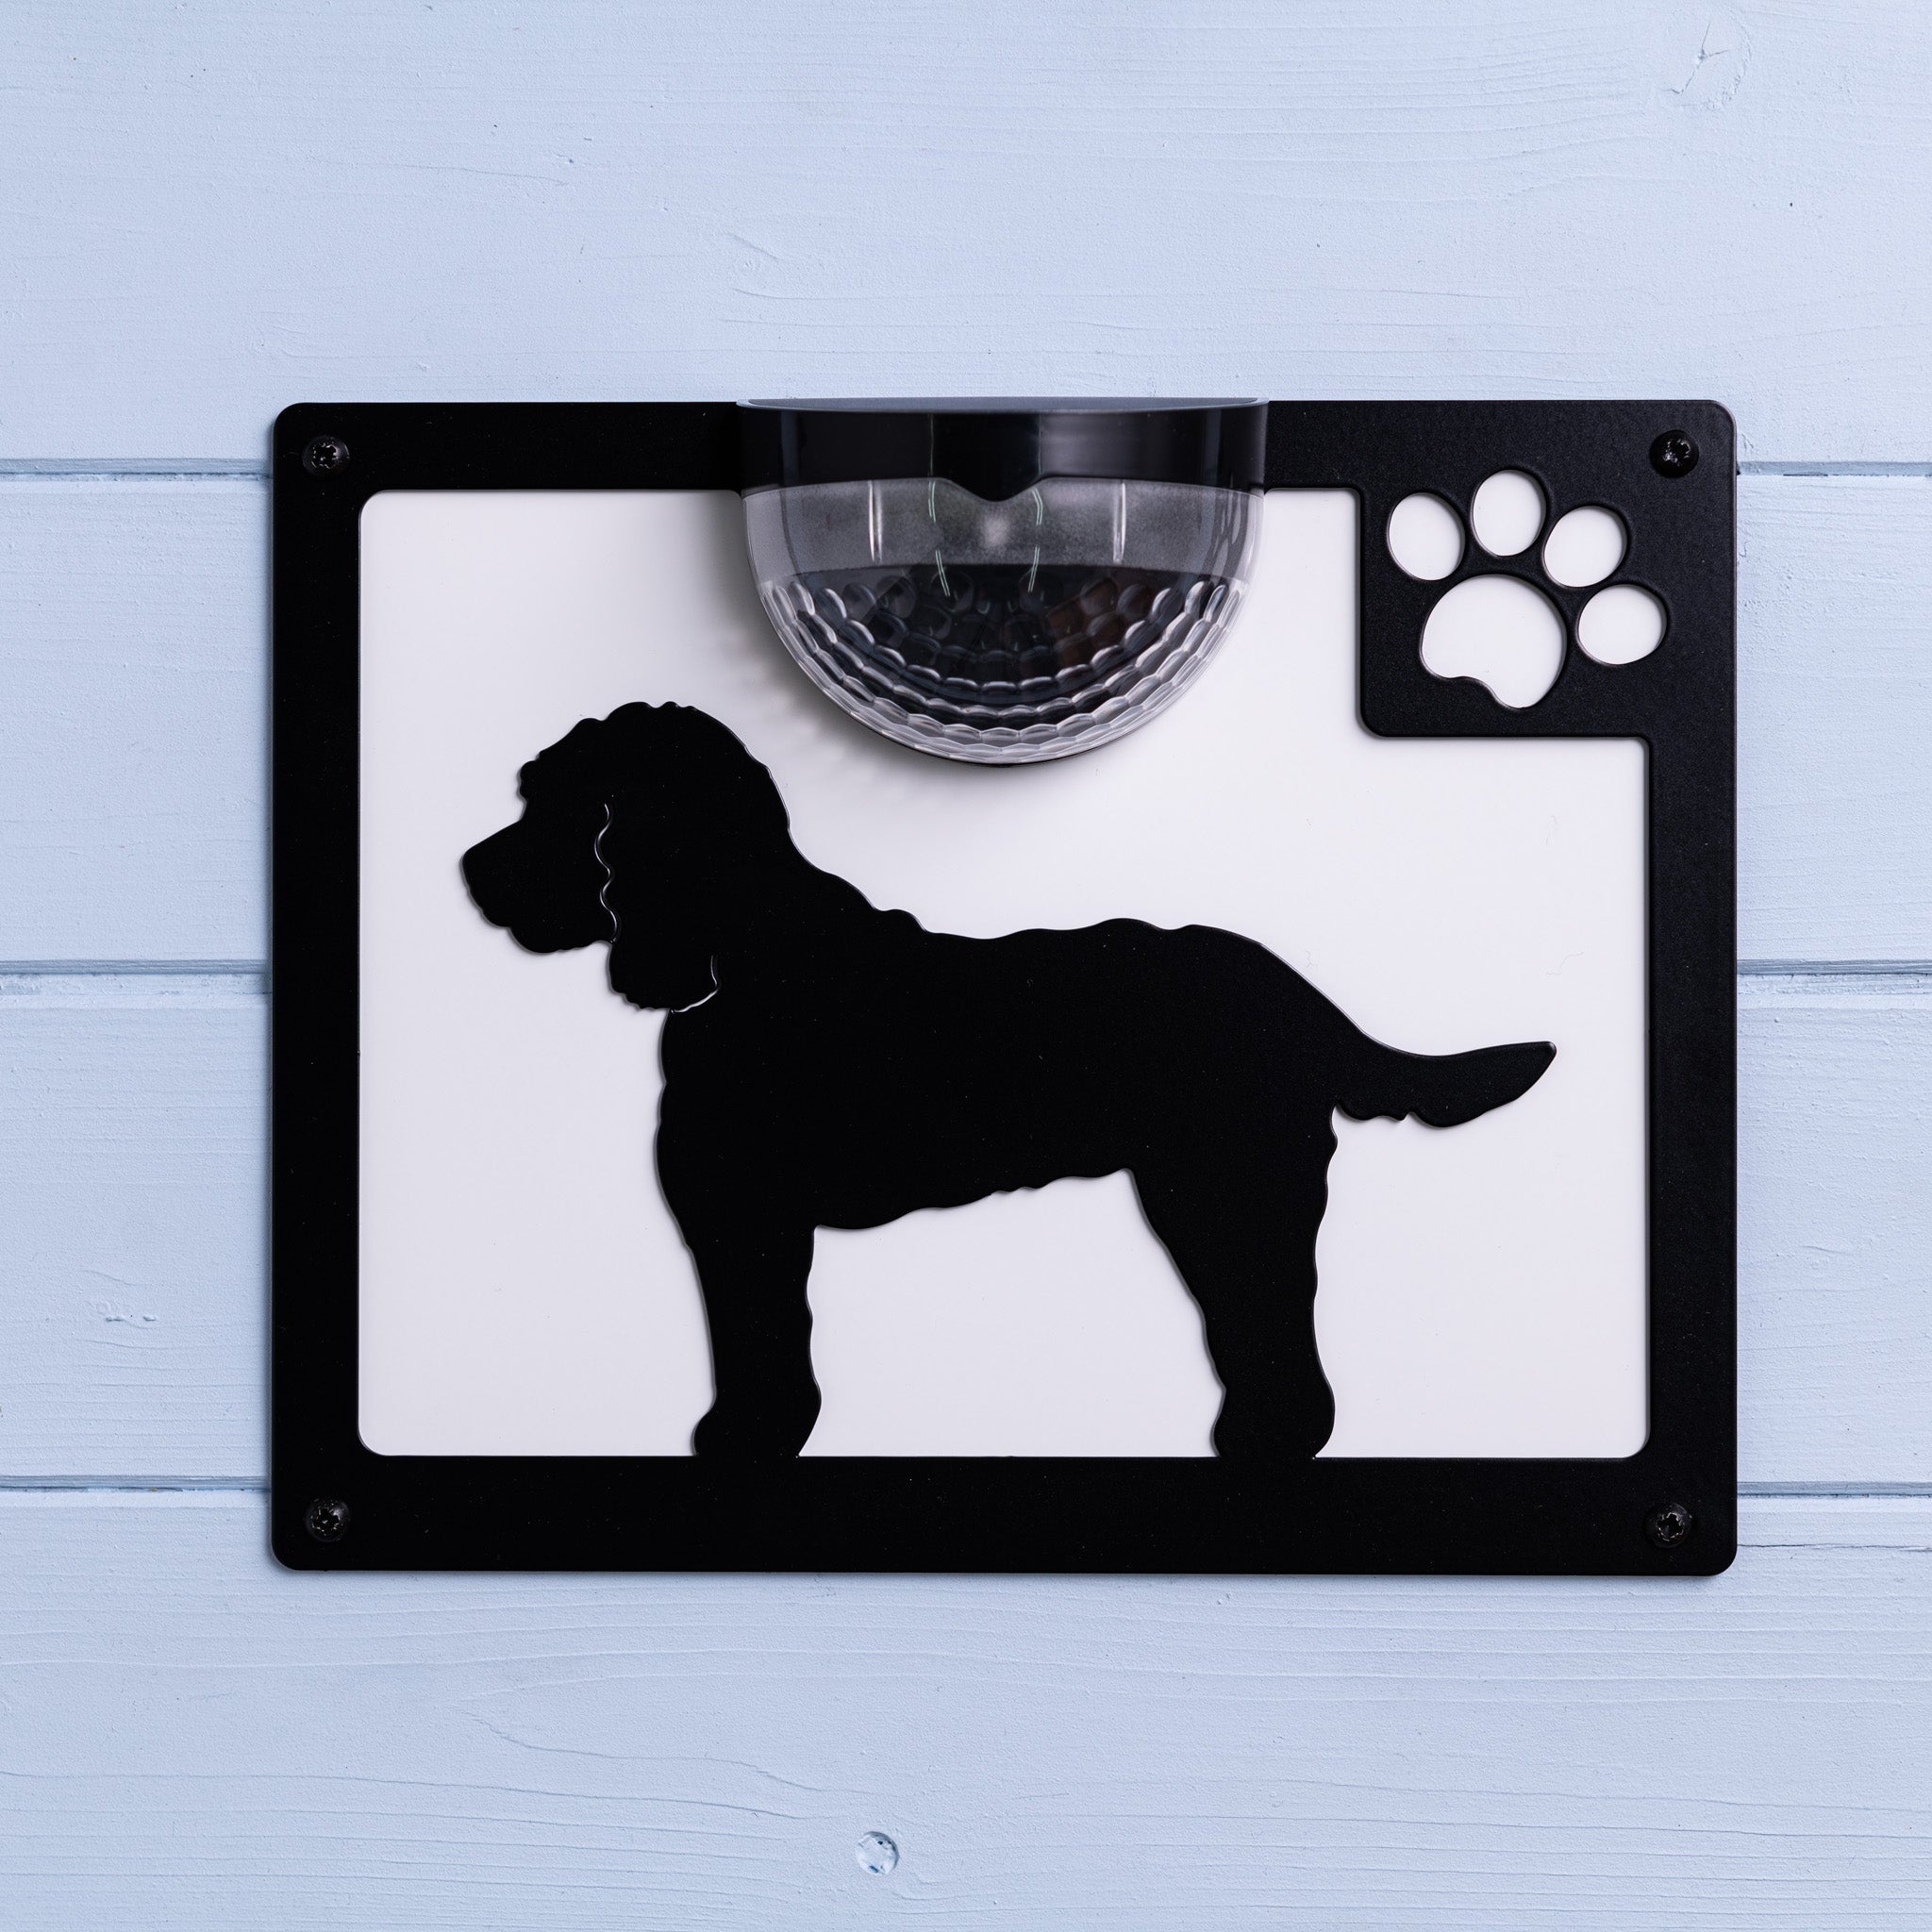 Cockapoo Dog Solar Light Wall Plaque on Blue Shed Background with White Backing